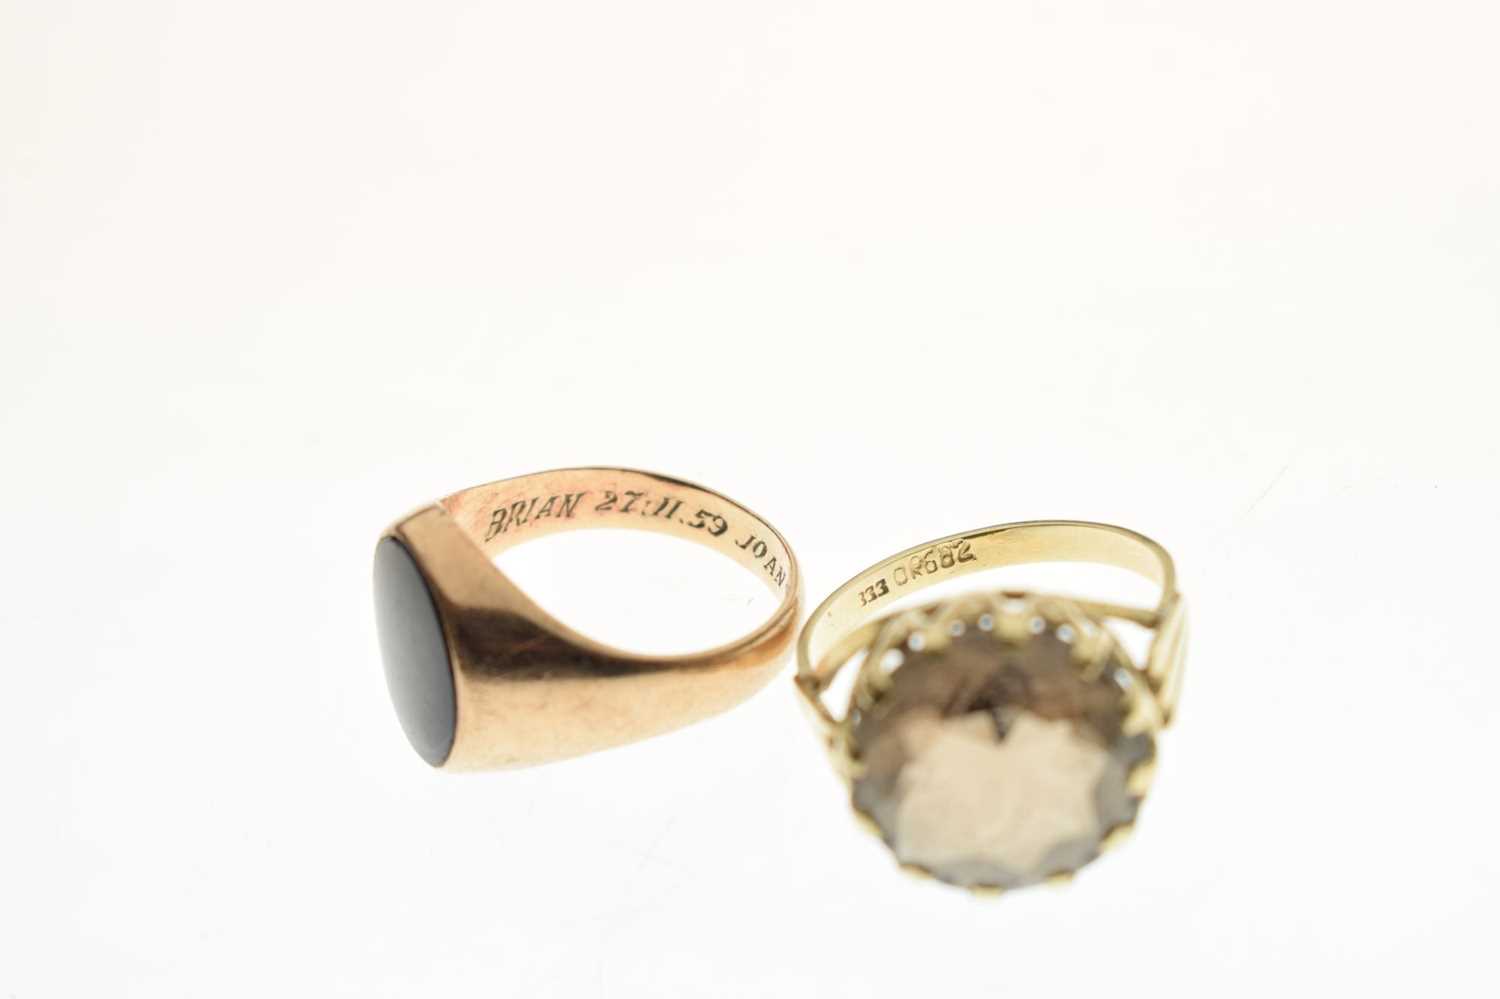 Smokey quartz ring, and a 9ct gold onyx signet ring (2) - Image 5 of 6